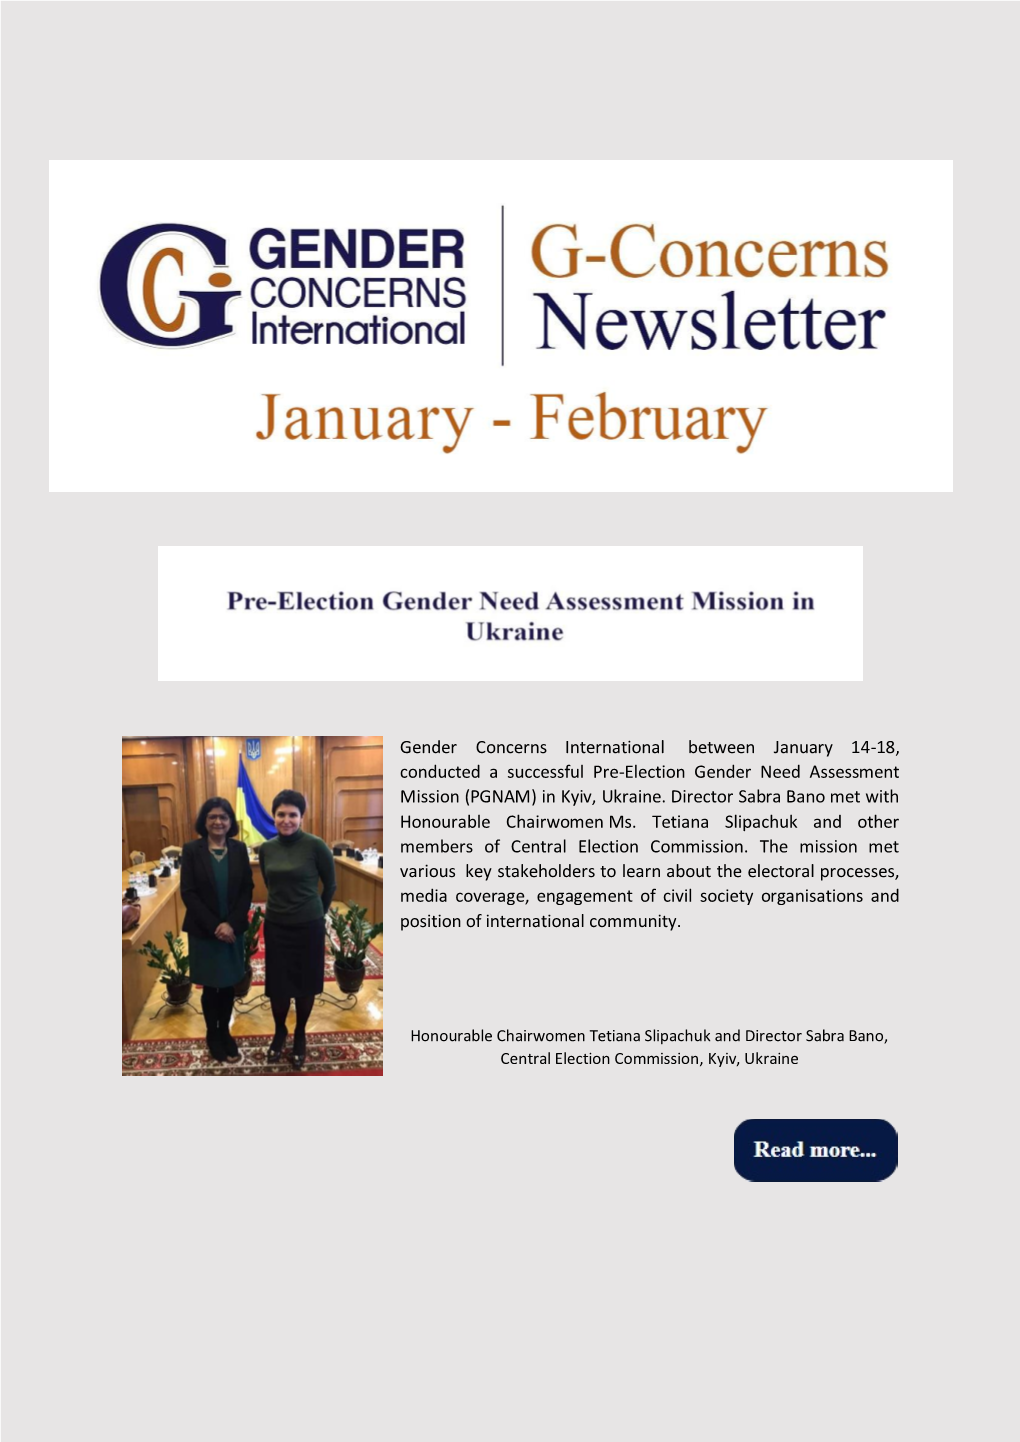 Gender Concerns International Between January 14-18, Conducted a Successful Pre-Election Gender Need Assessment Mission (PGNAM) in Kyiv, Ukraine